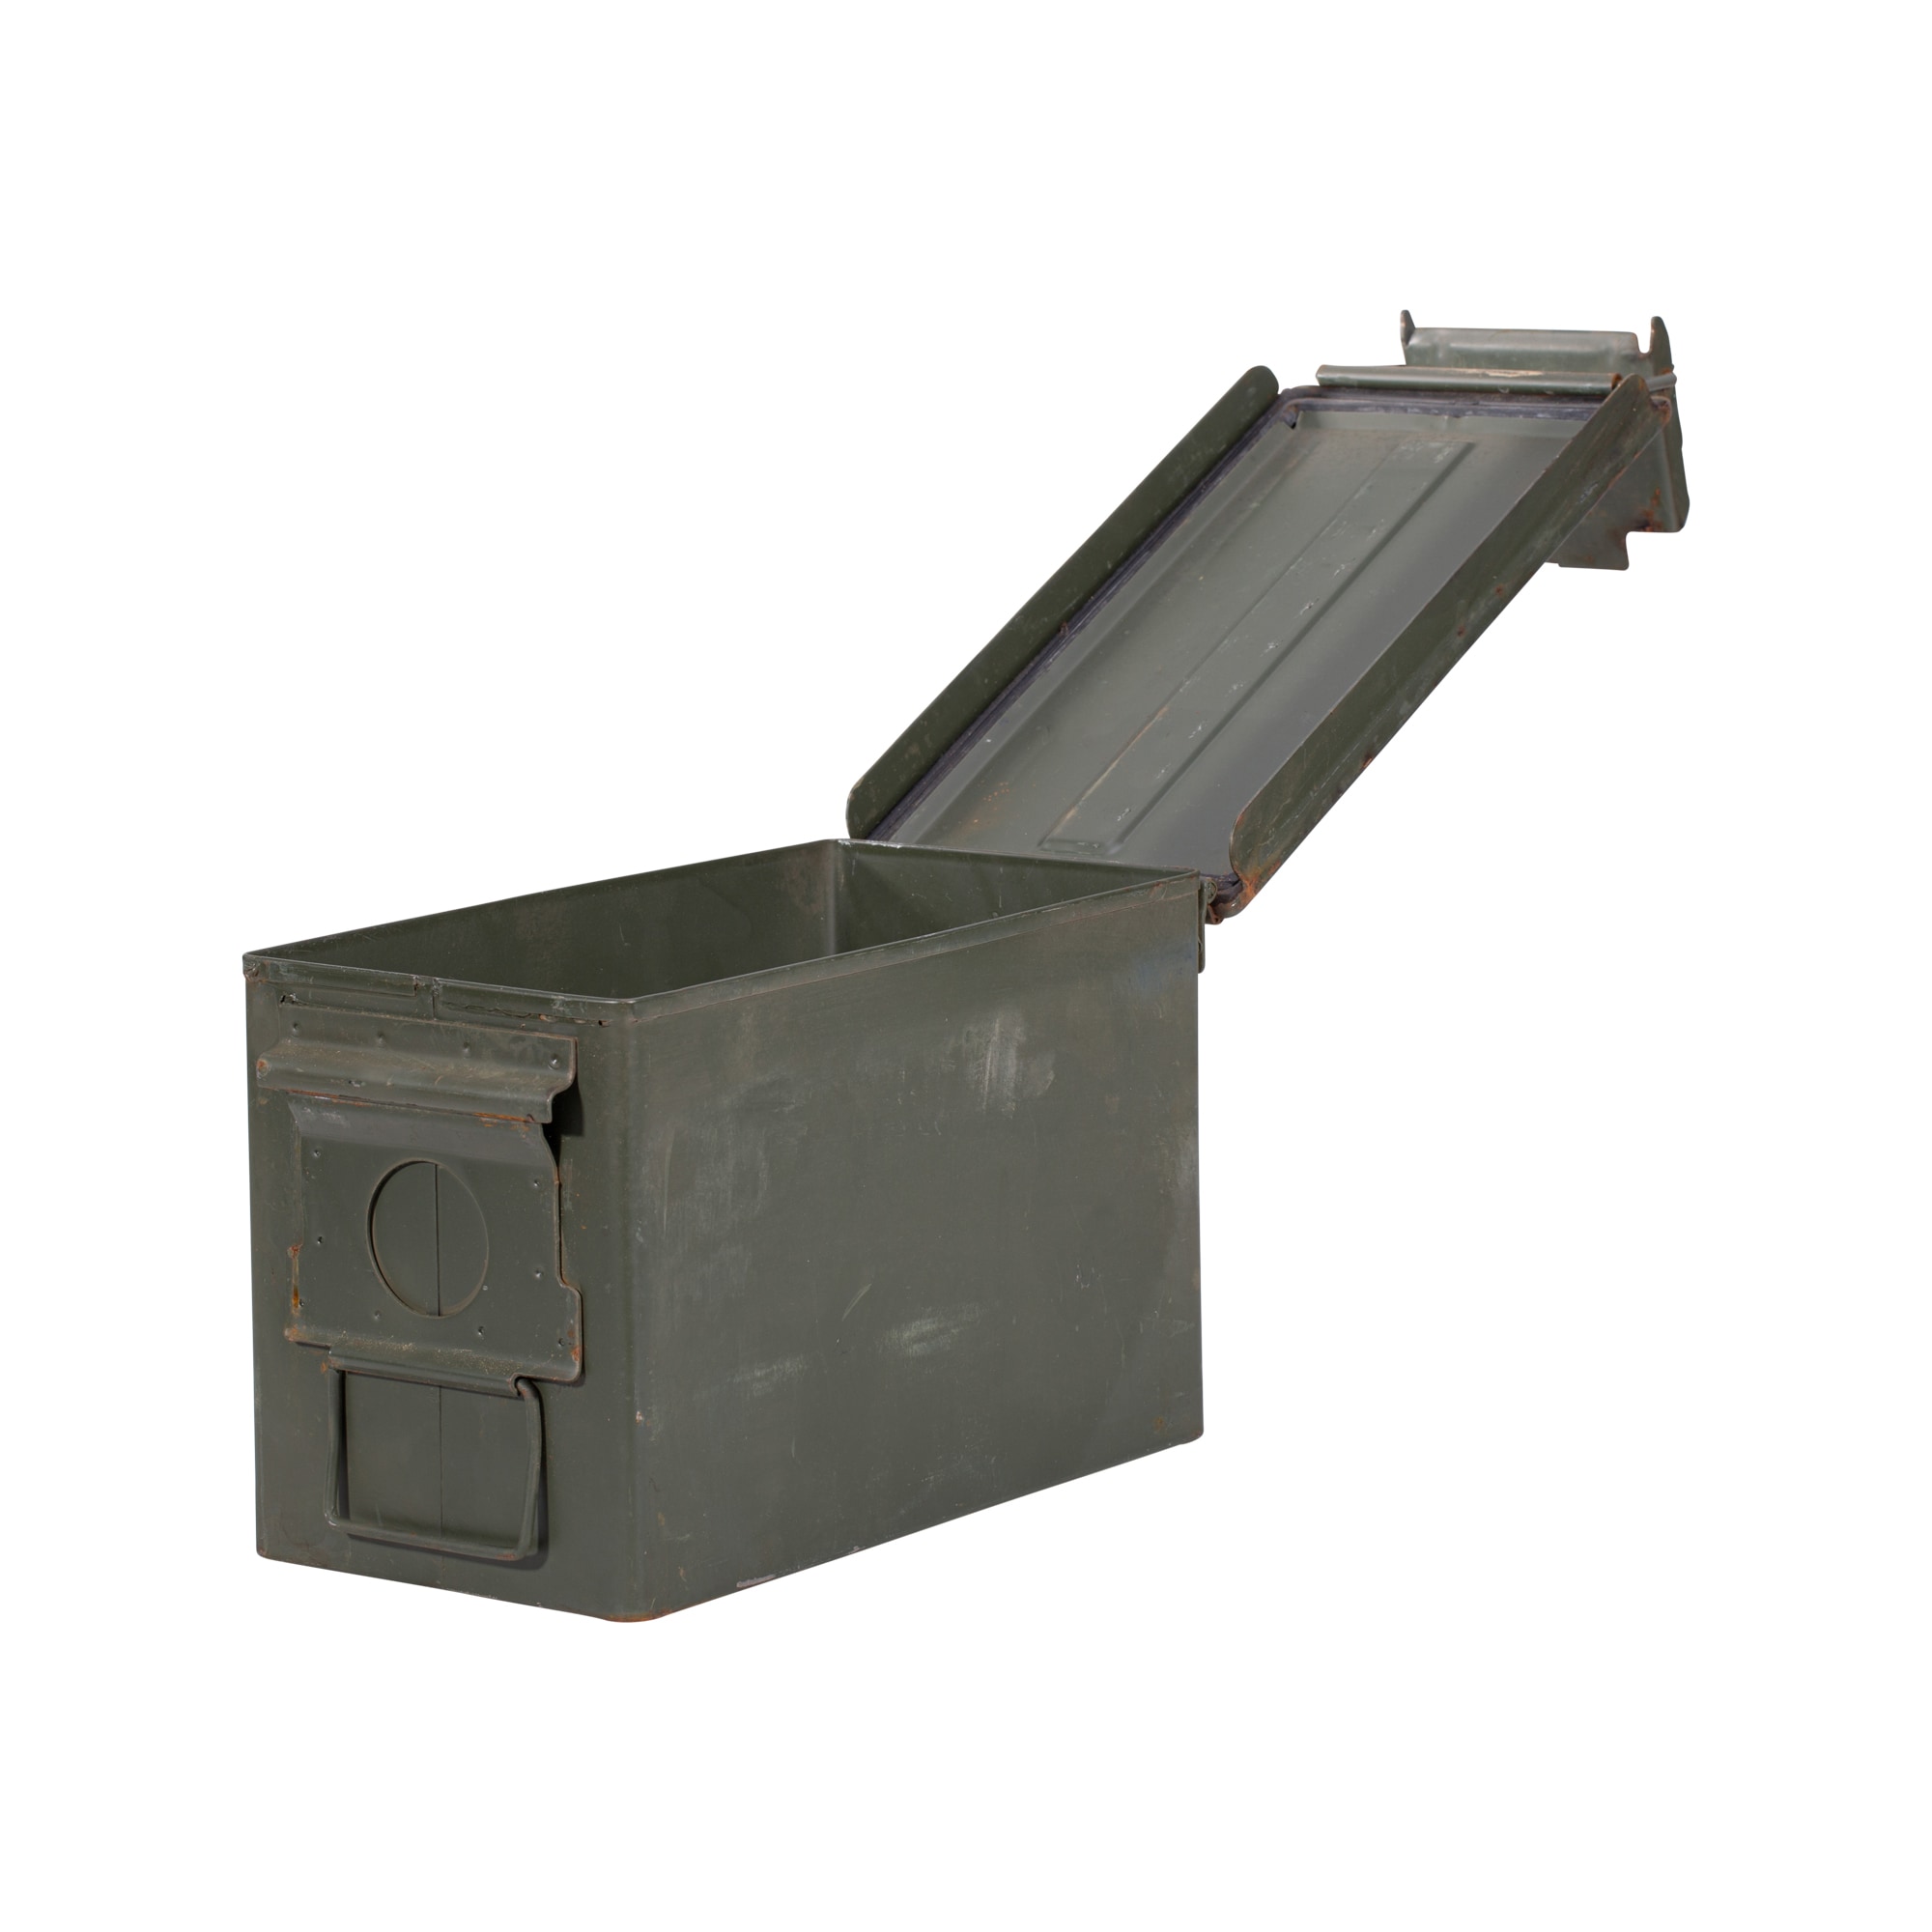 AB Plastic ammo boxes for AMMO BOX US CAL.50